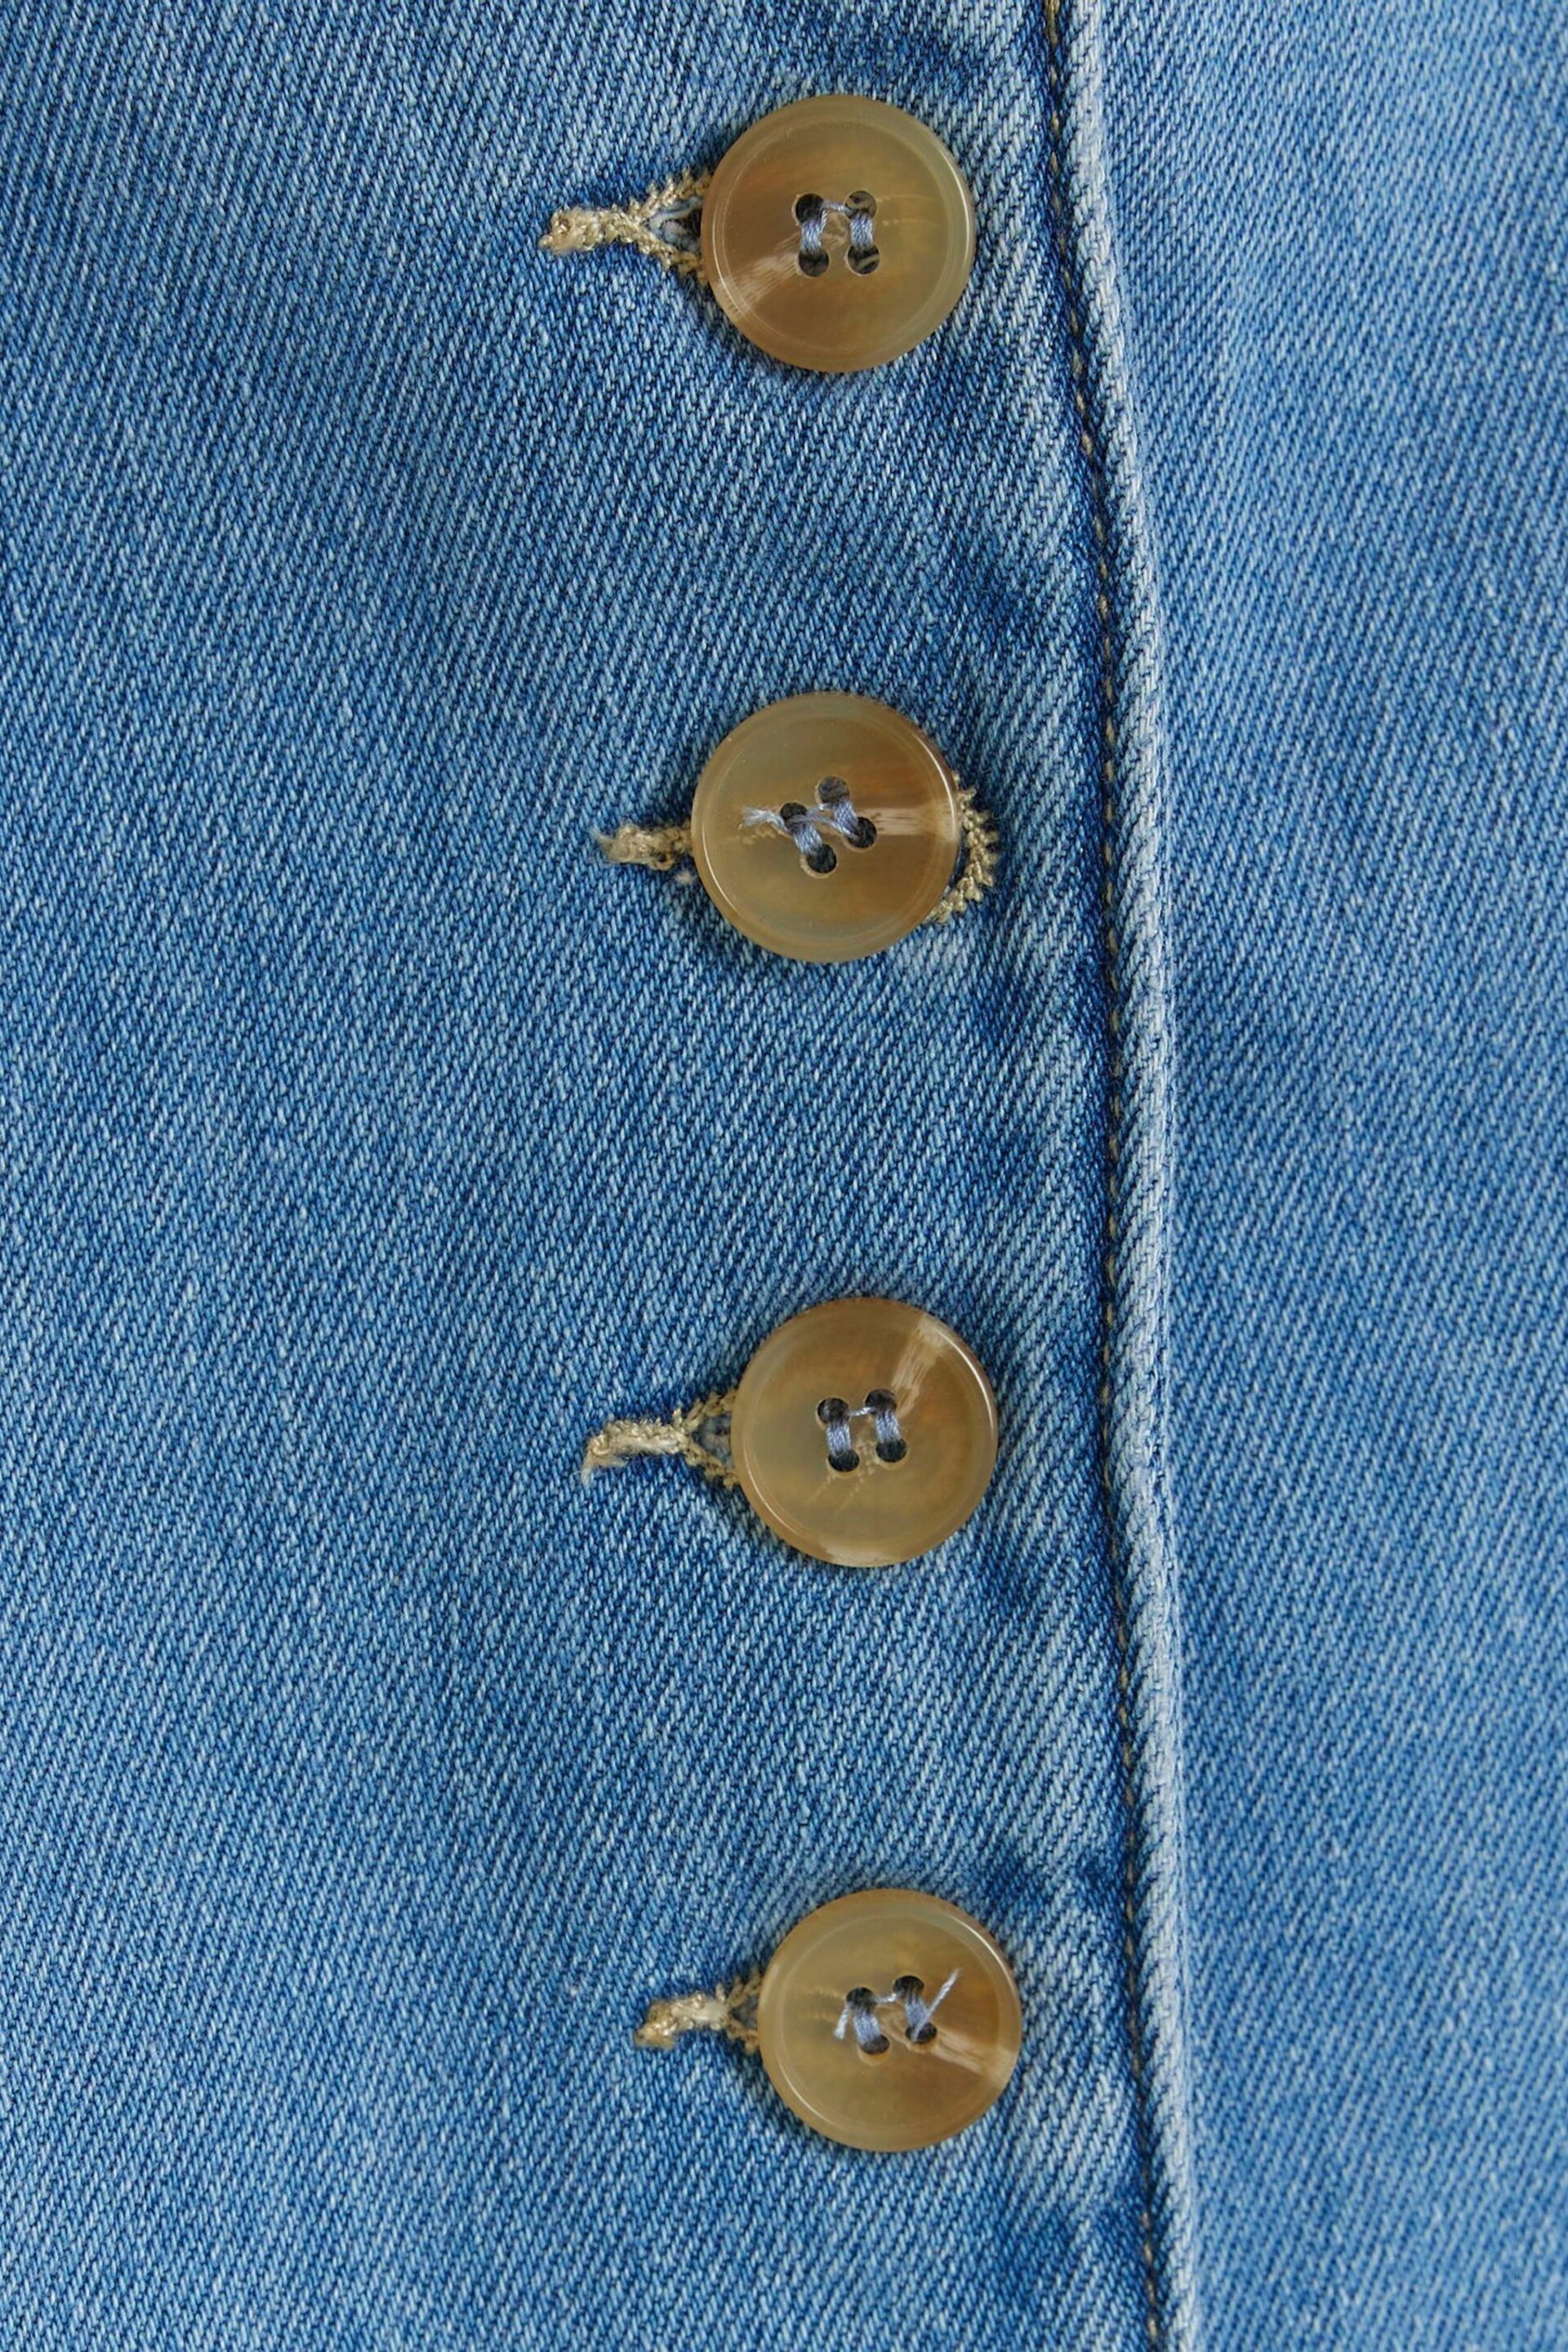 River Island Blue Denim Button Front Waistcoat - Image 5 of 5